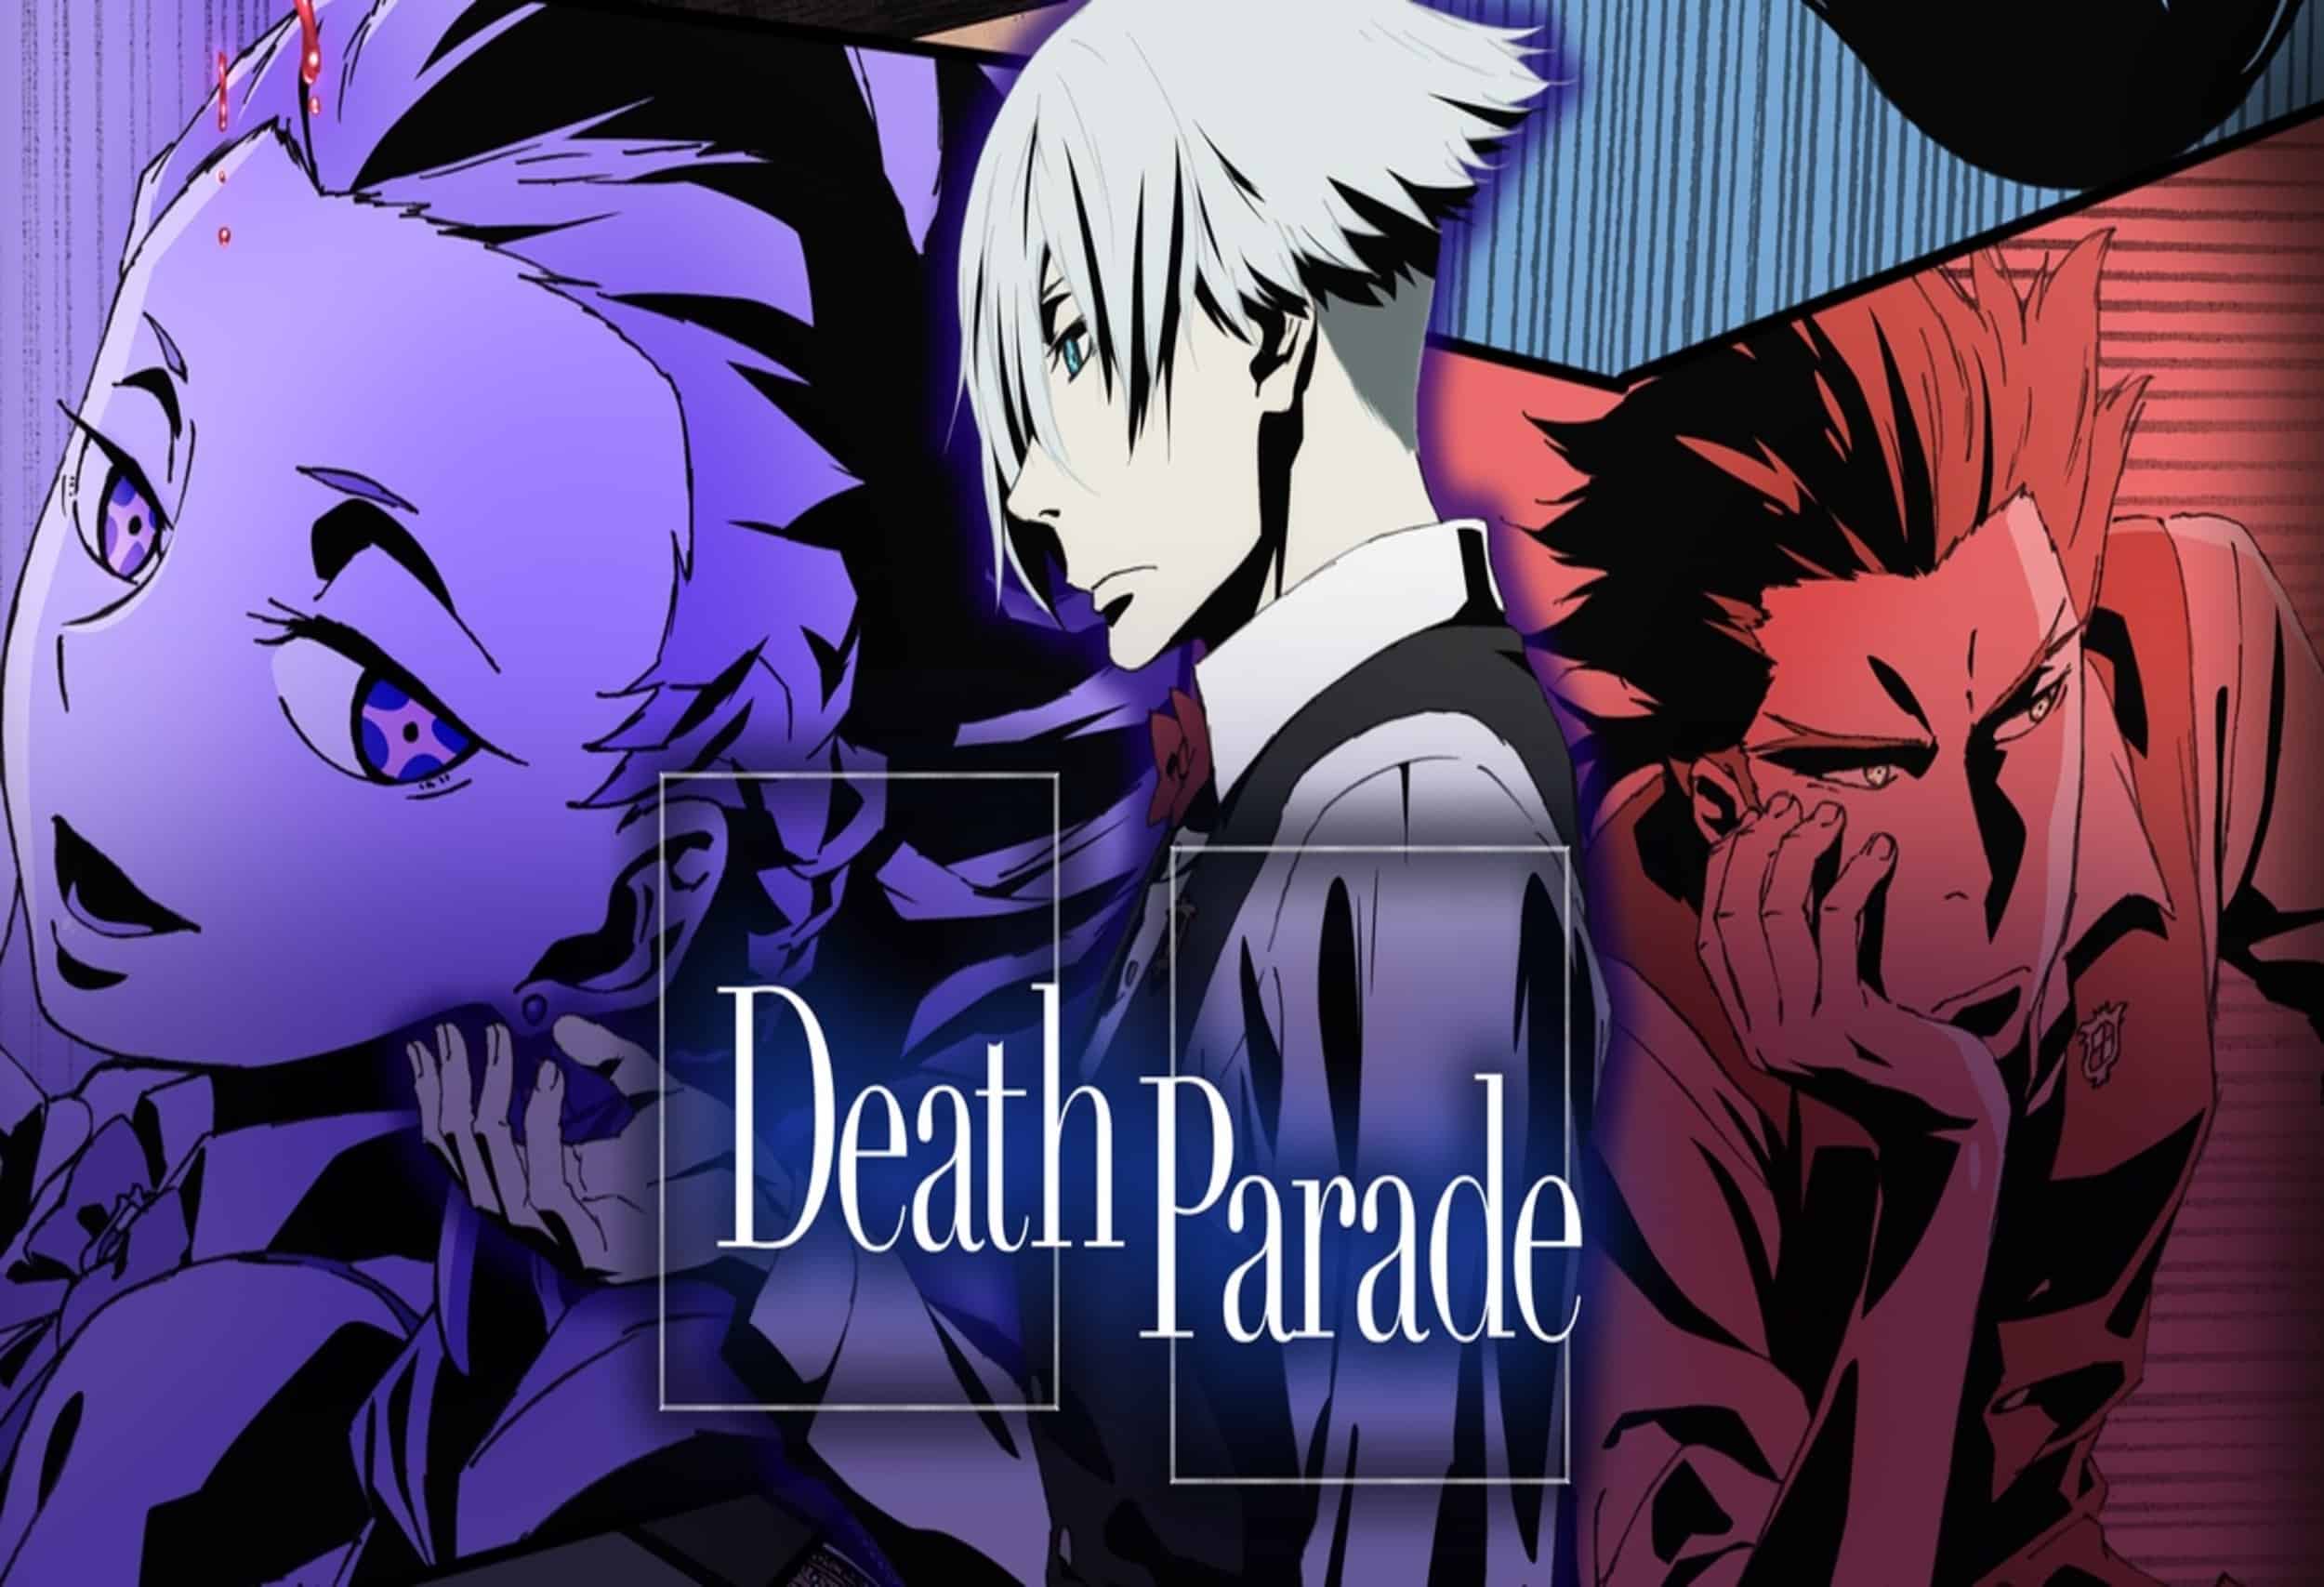  Death Parade anime's official cover art